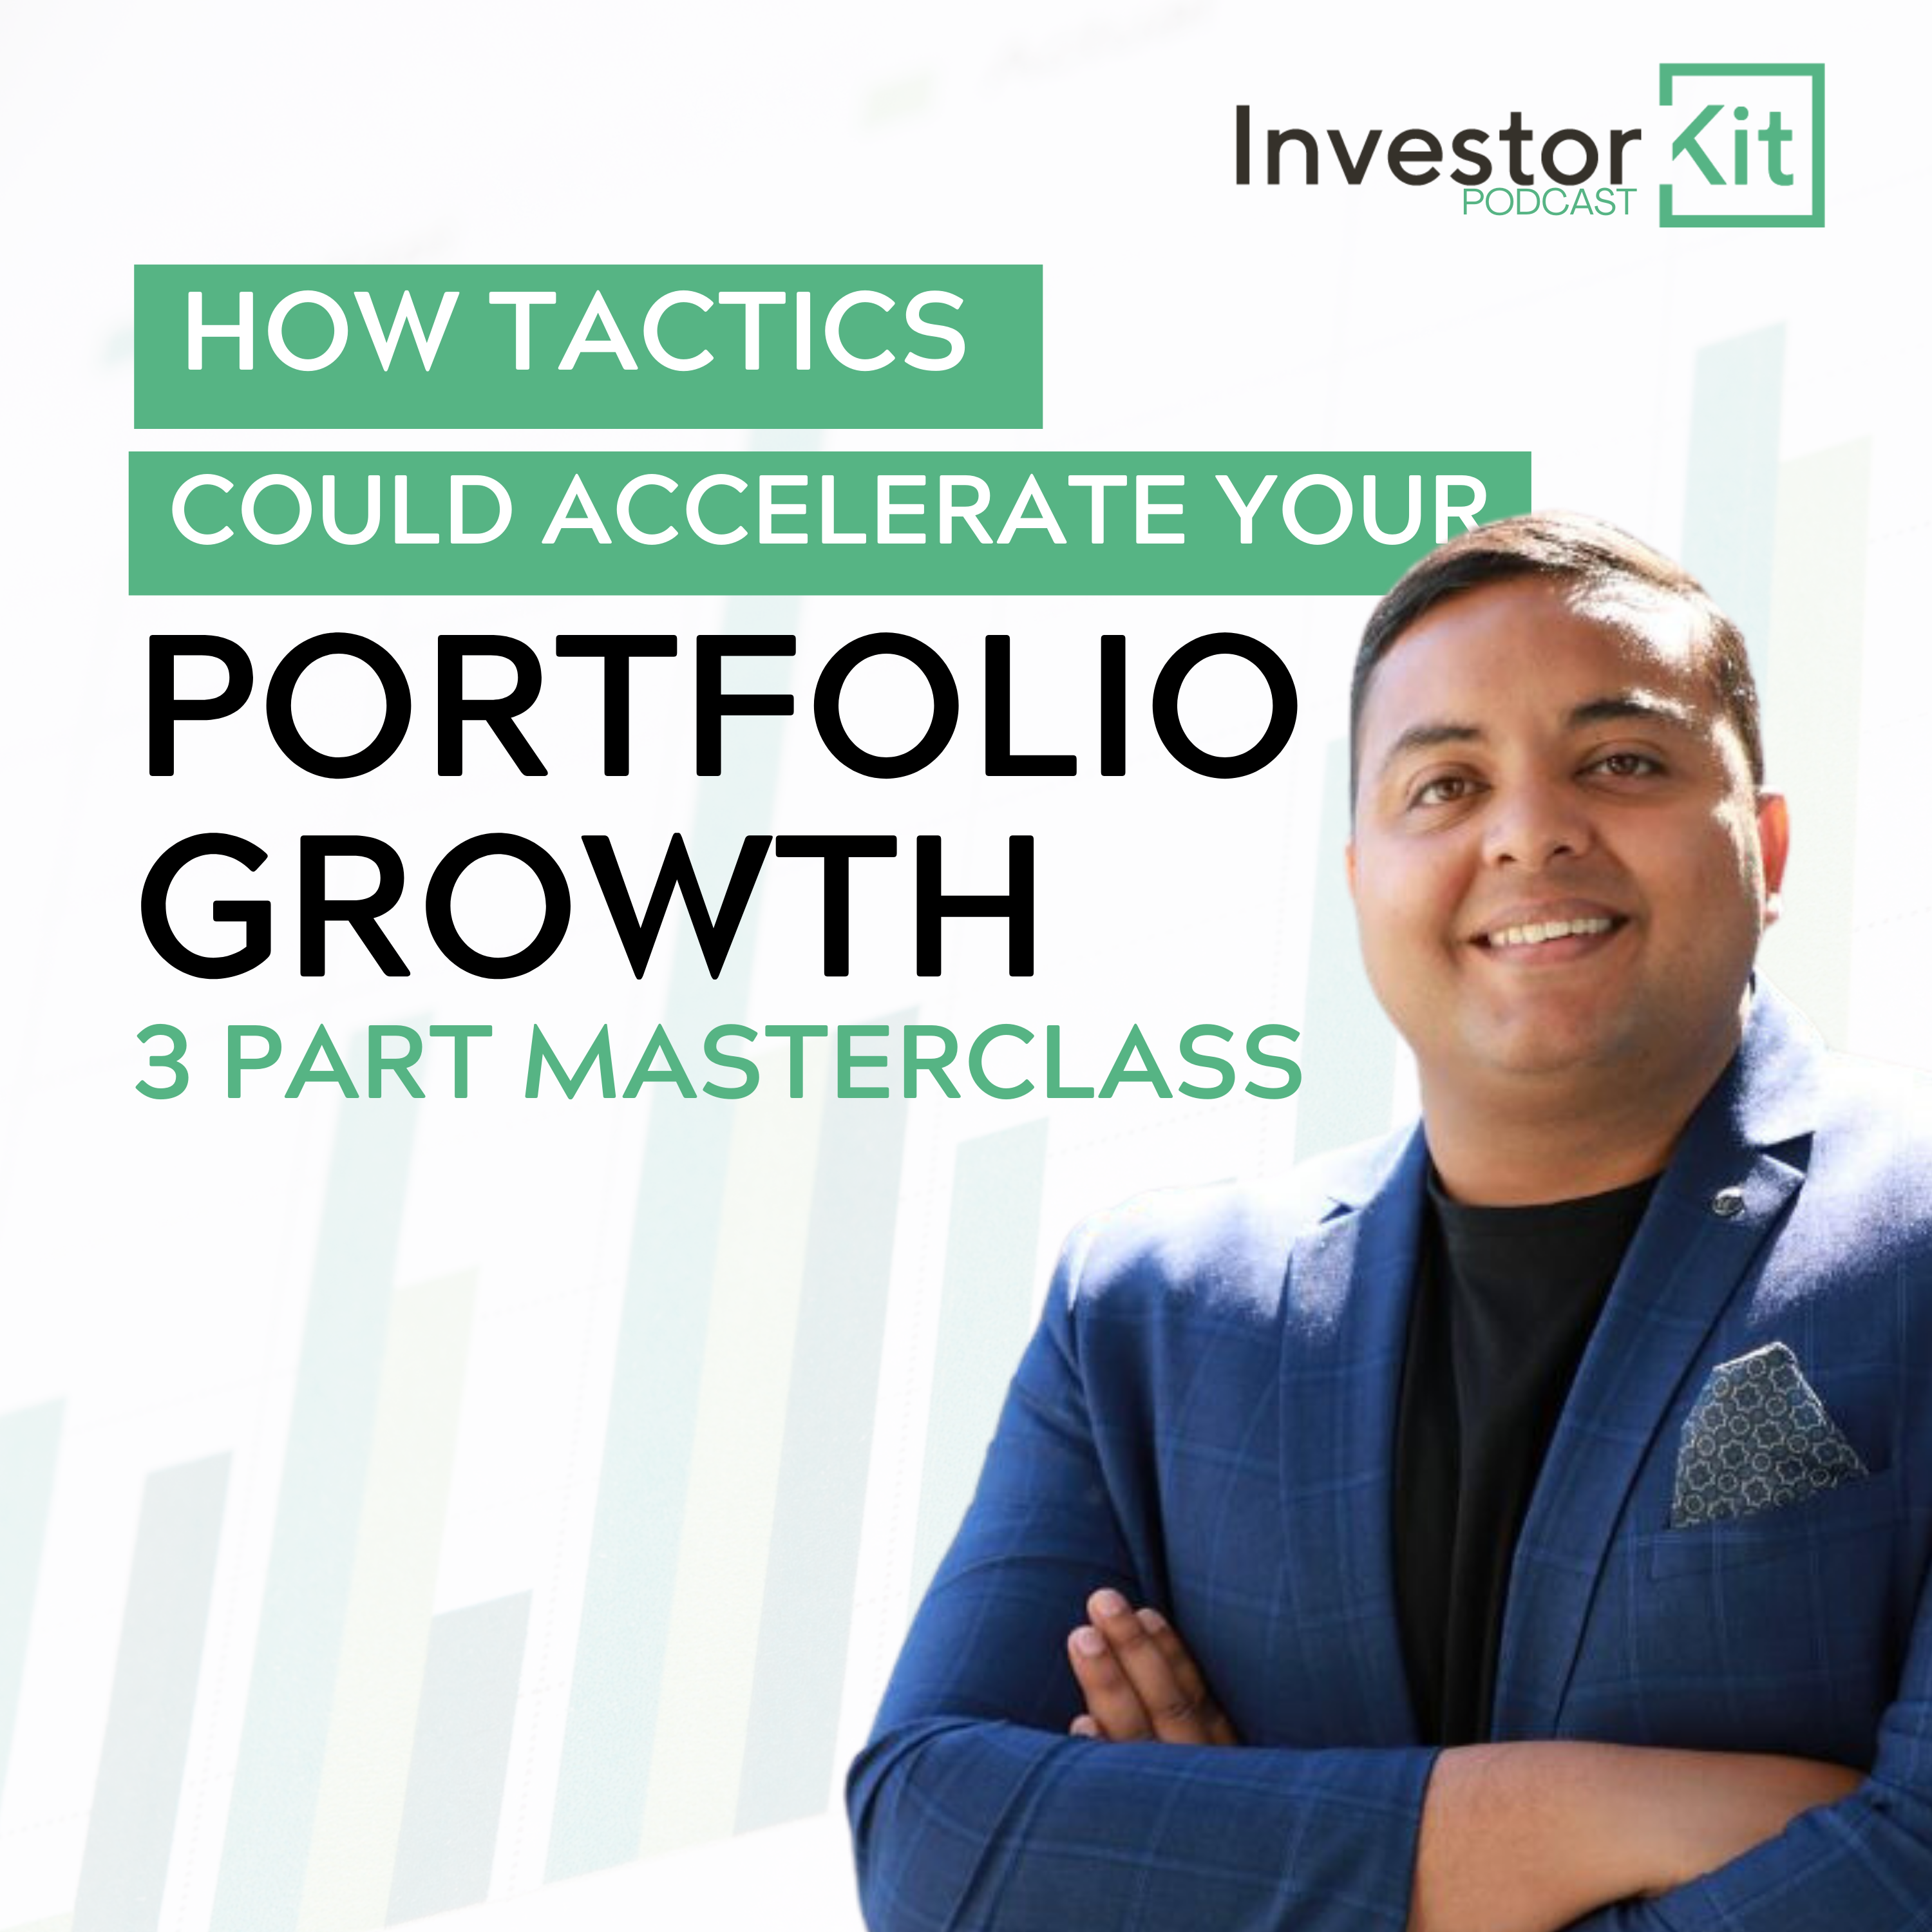 How Tactics could Accelerate Portfolio Growth - 3 Part Masterclass